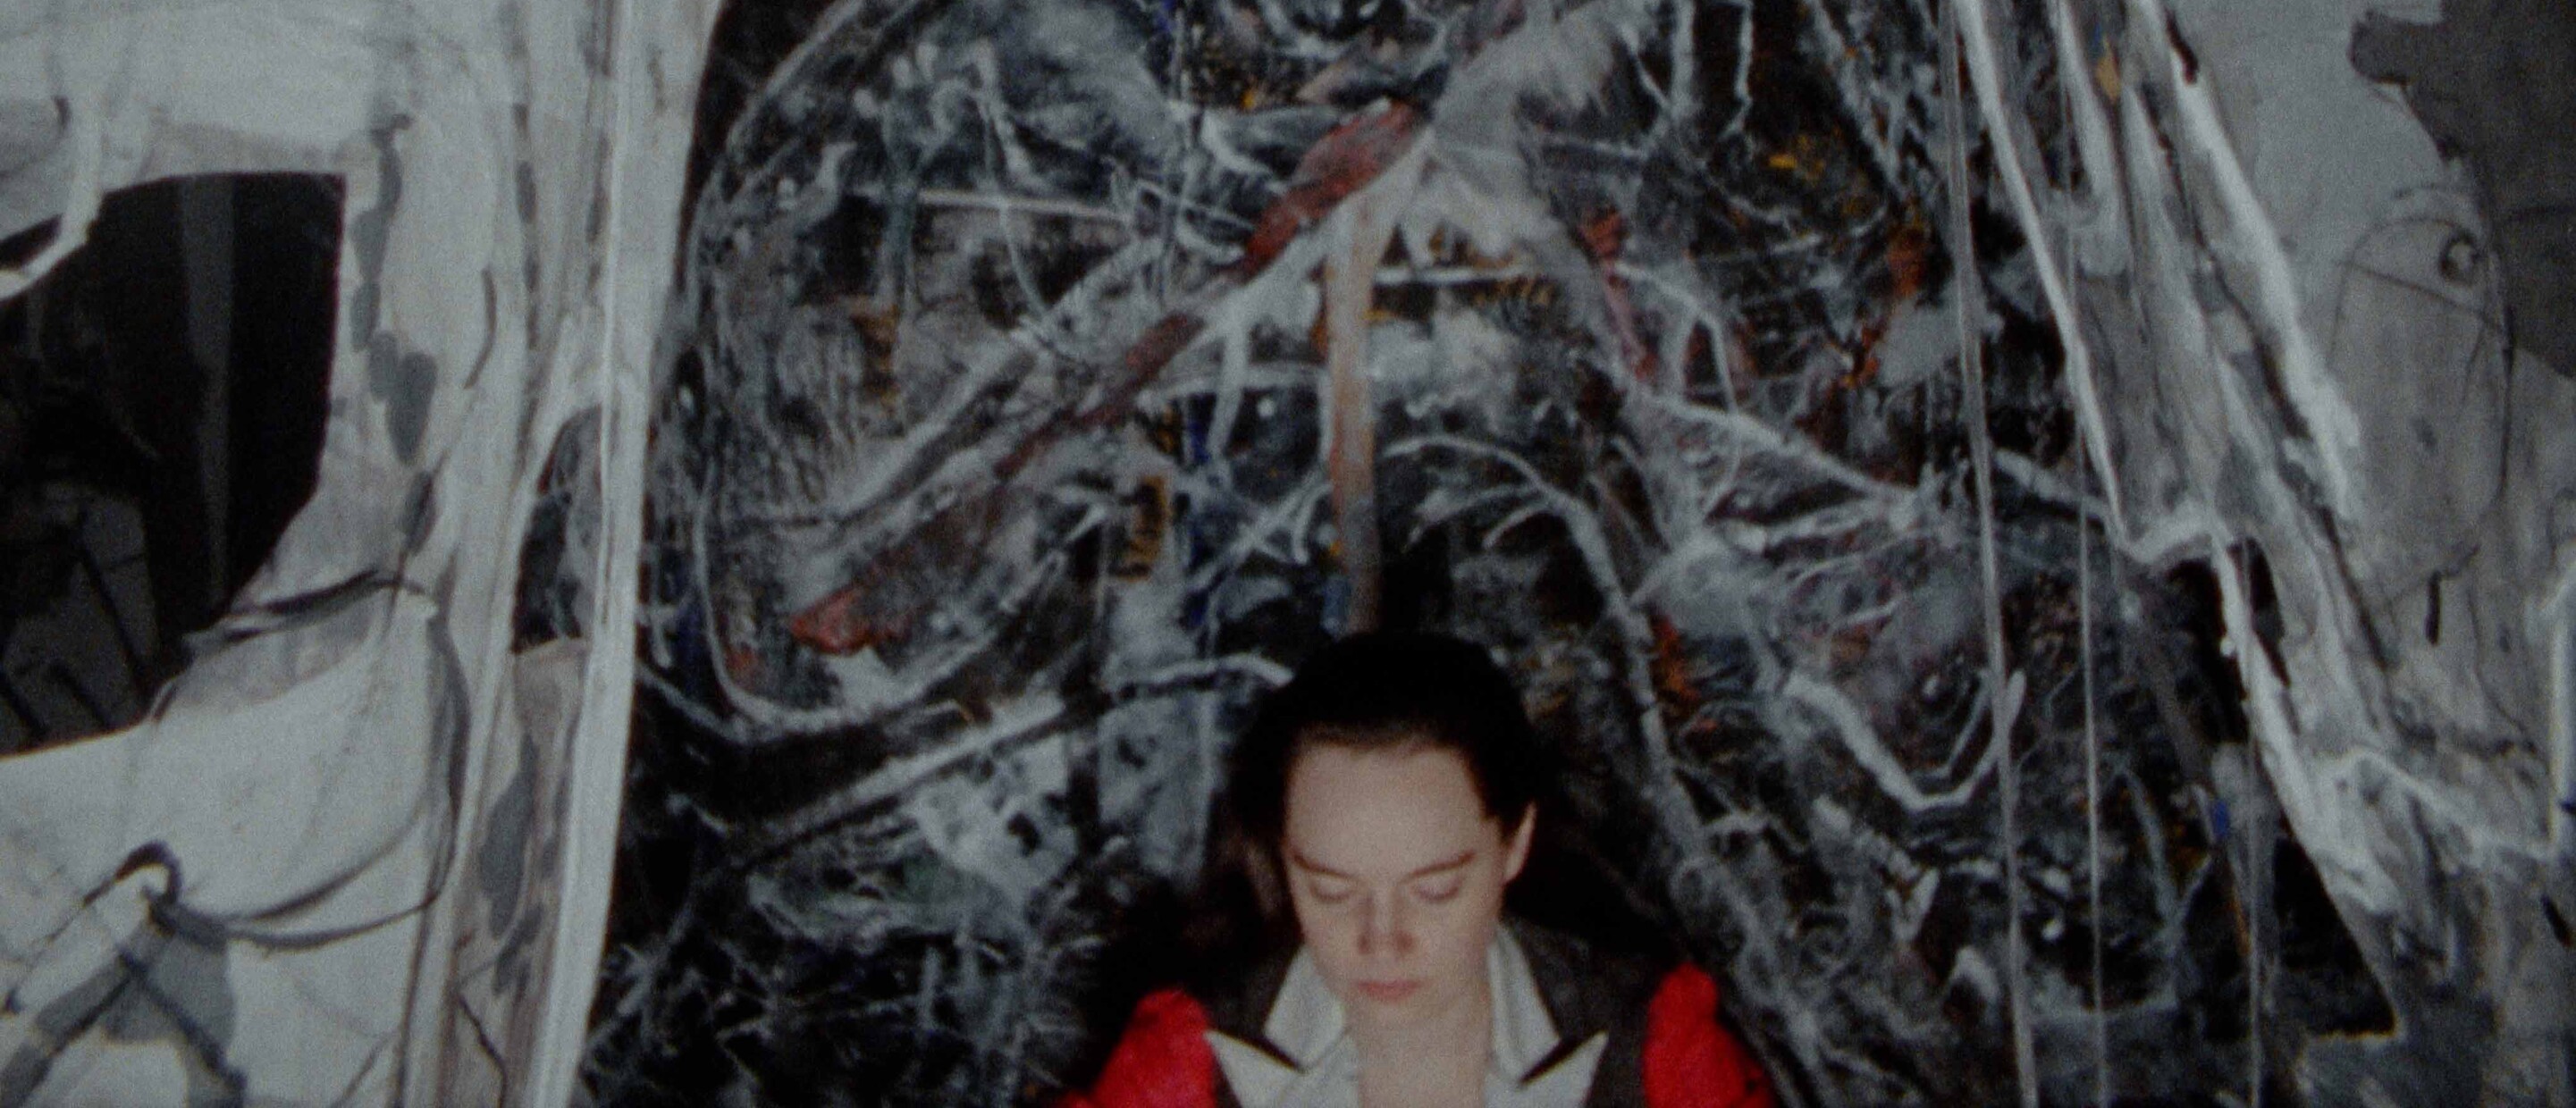 woman with red jacket sitting in front of abstract painted canvases